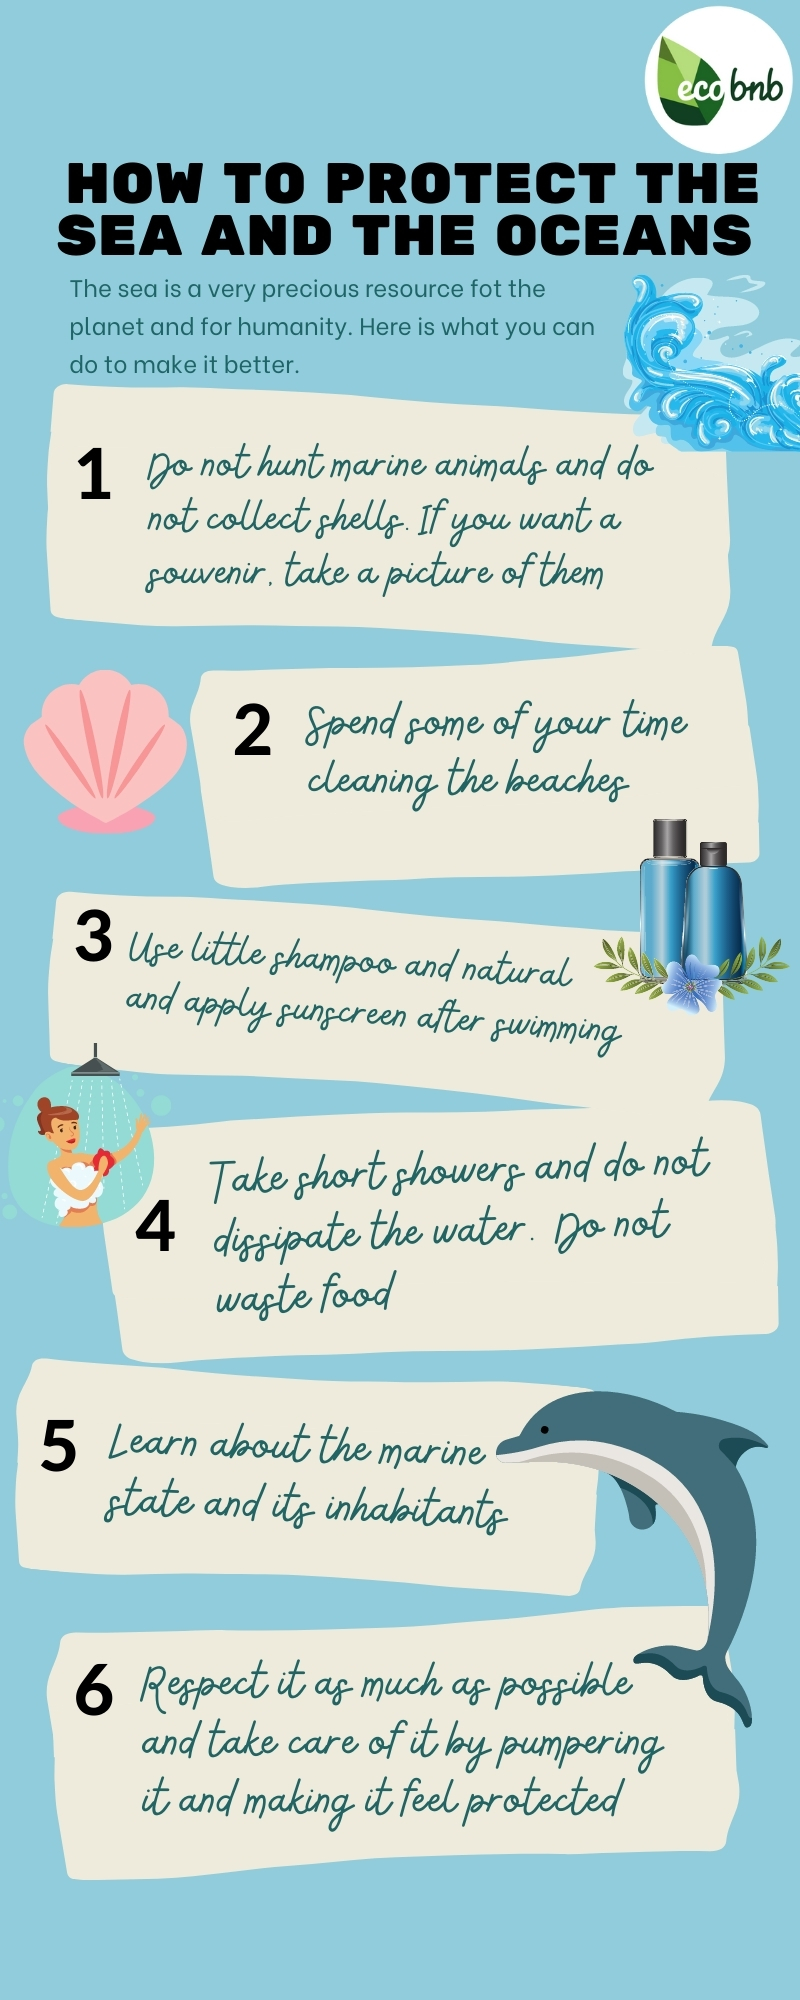 6 Ways to Protect the Sea and the Oceans